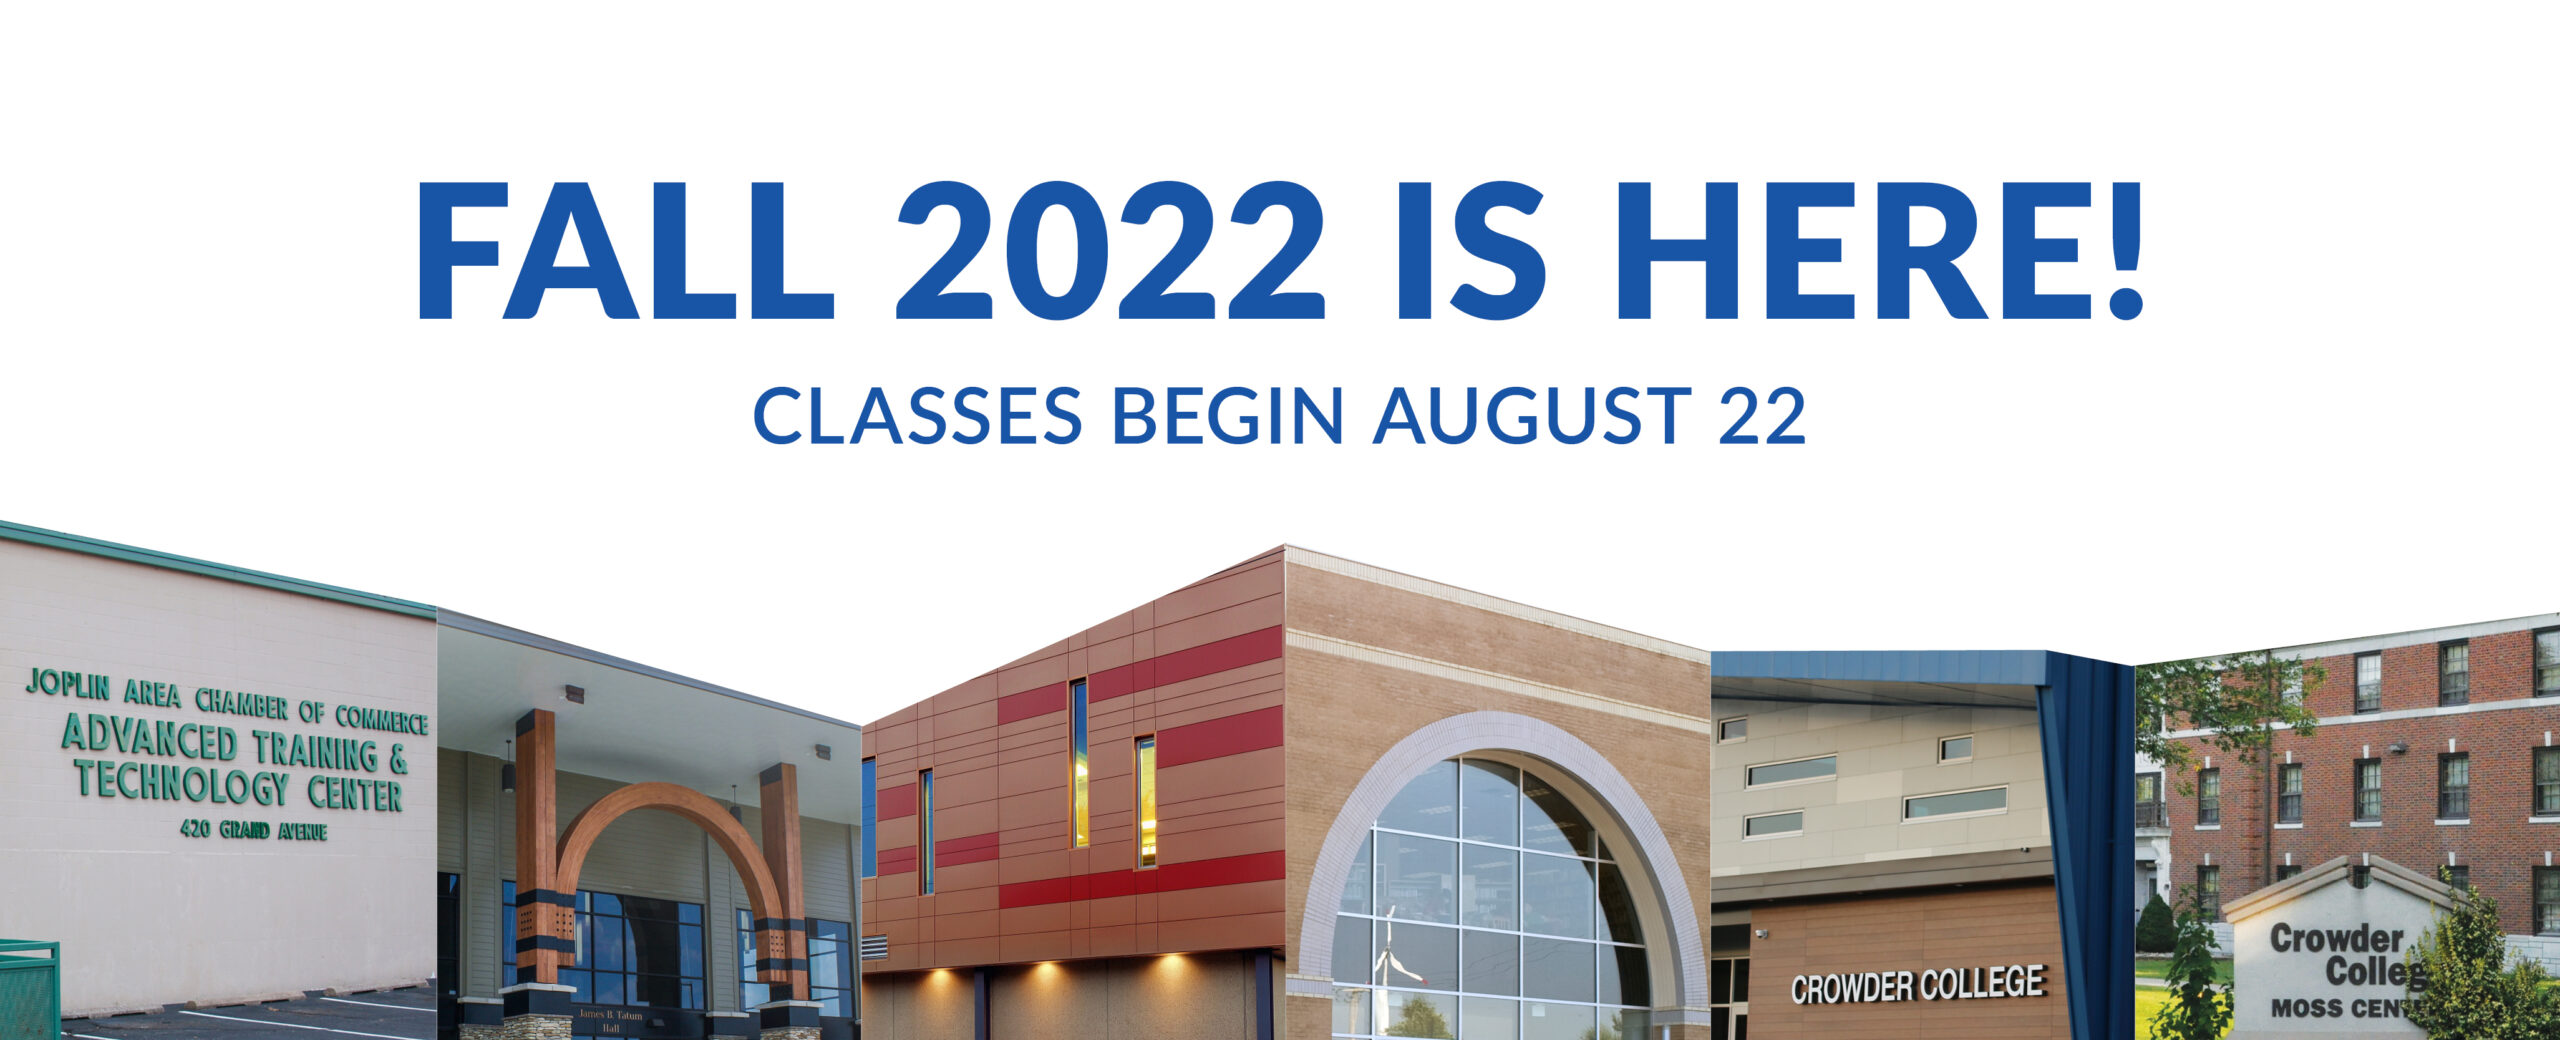 Fall 2022 is here! Classes begin August 22